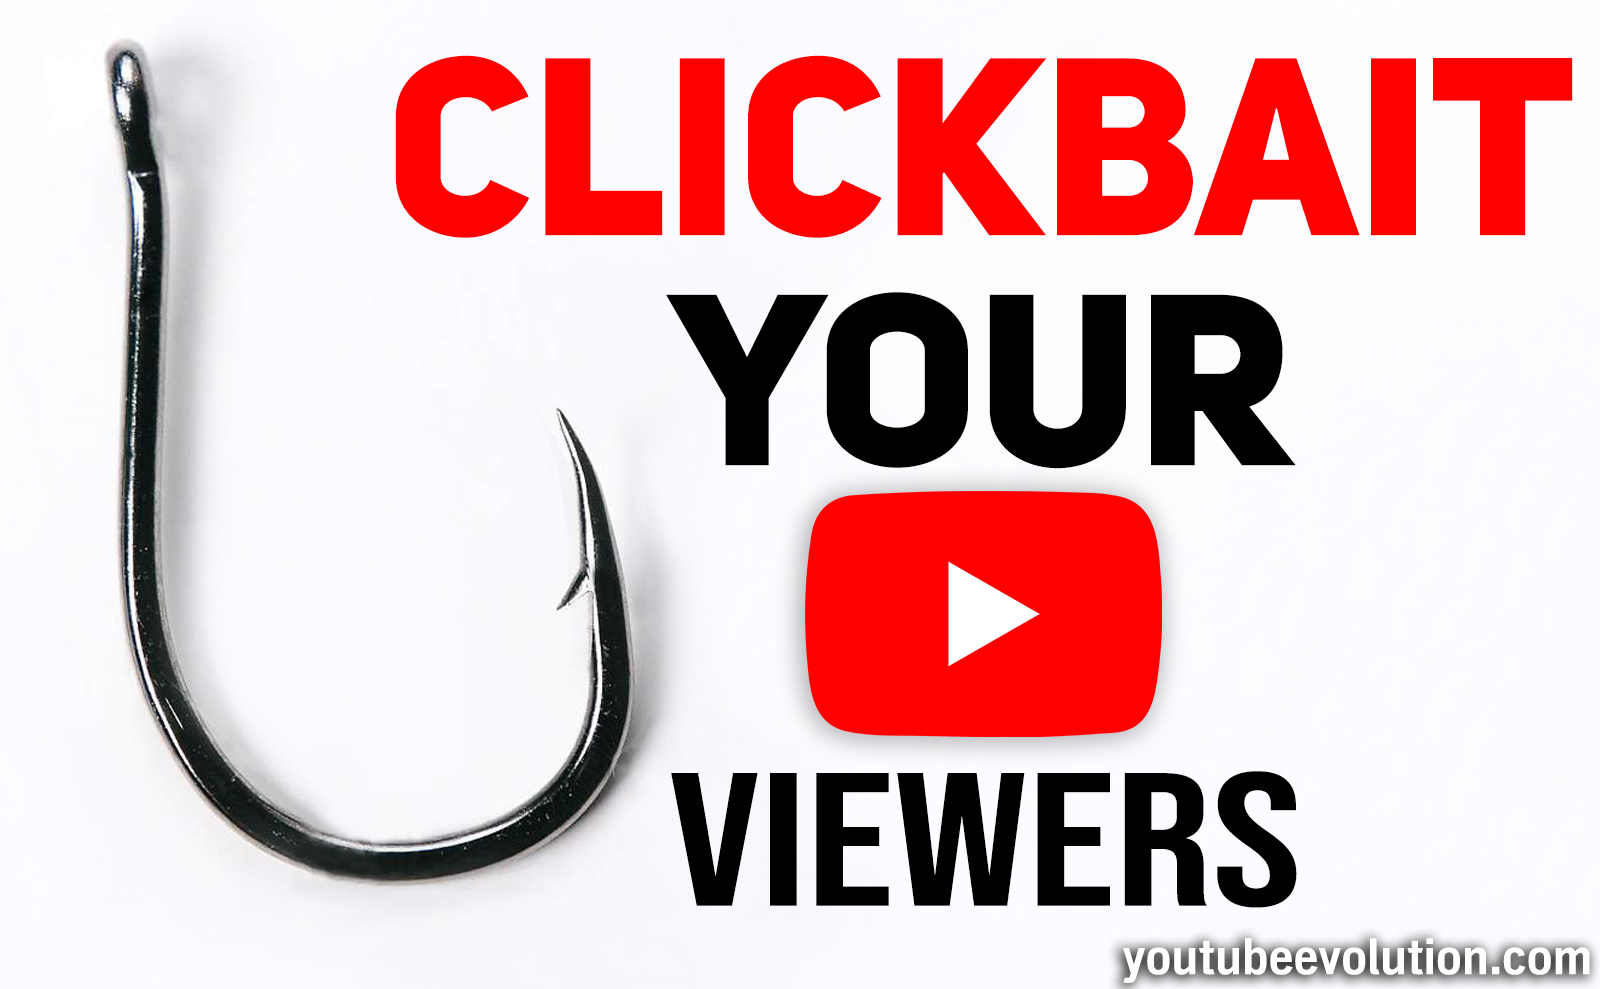 Clickbait YouTube Viewers